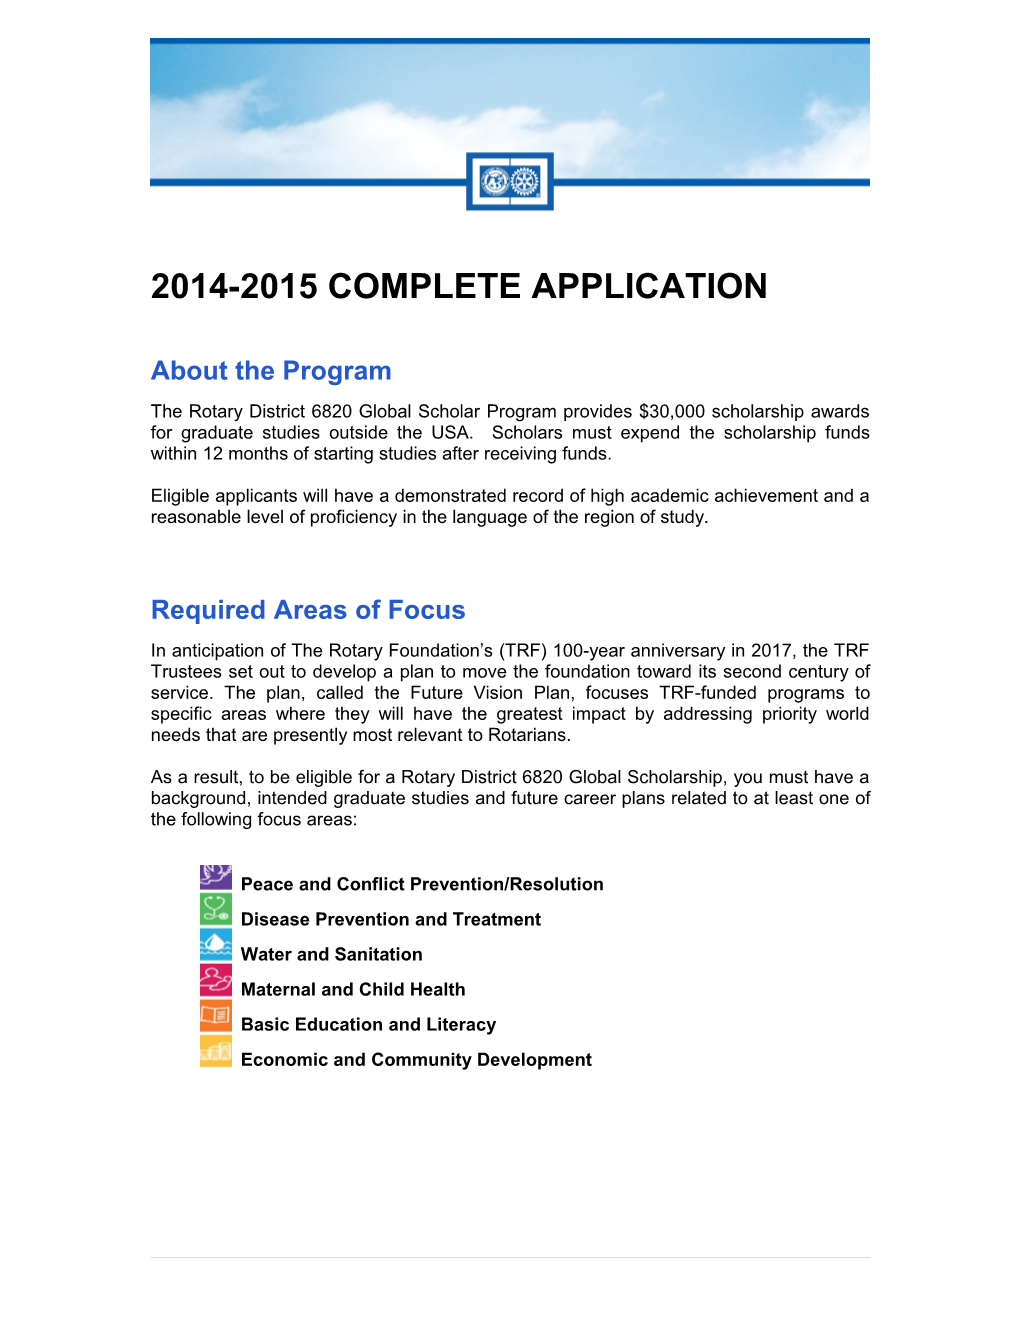 2014-2015 COMPLETE Application